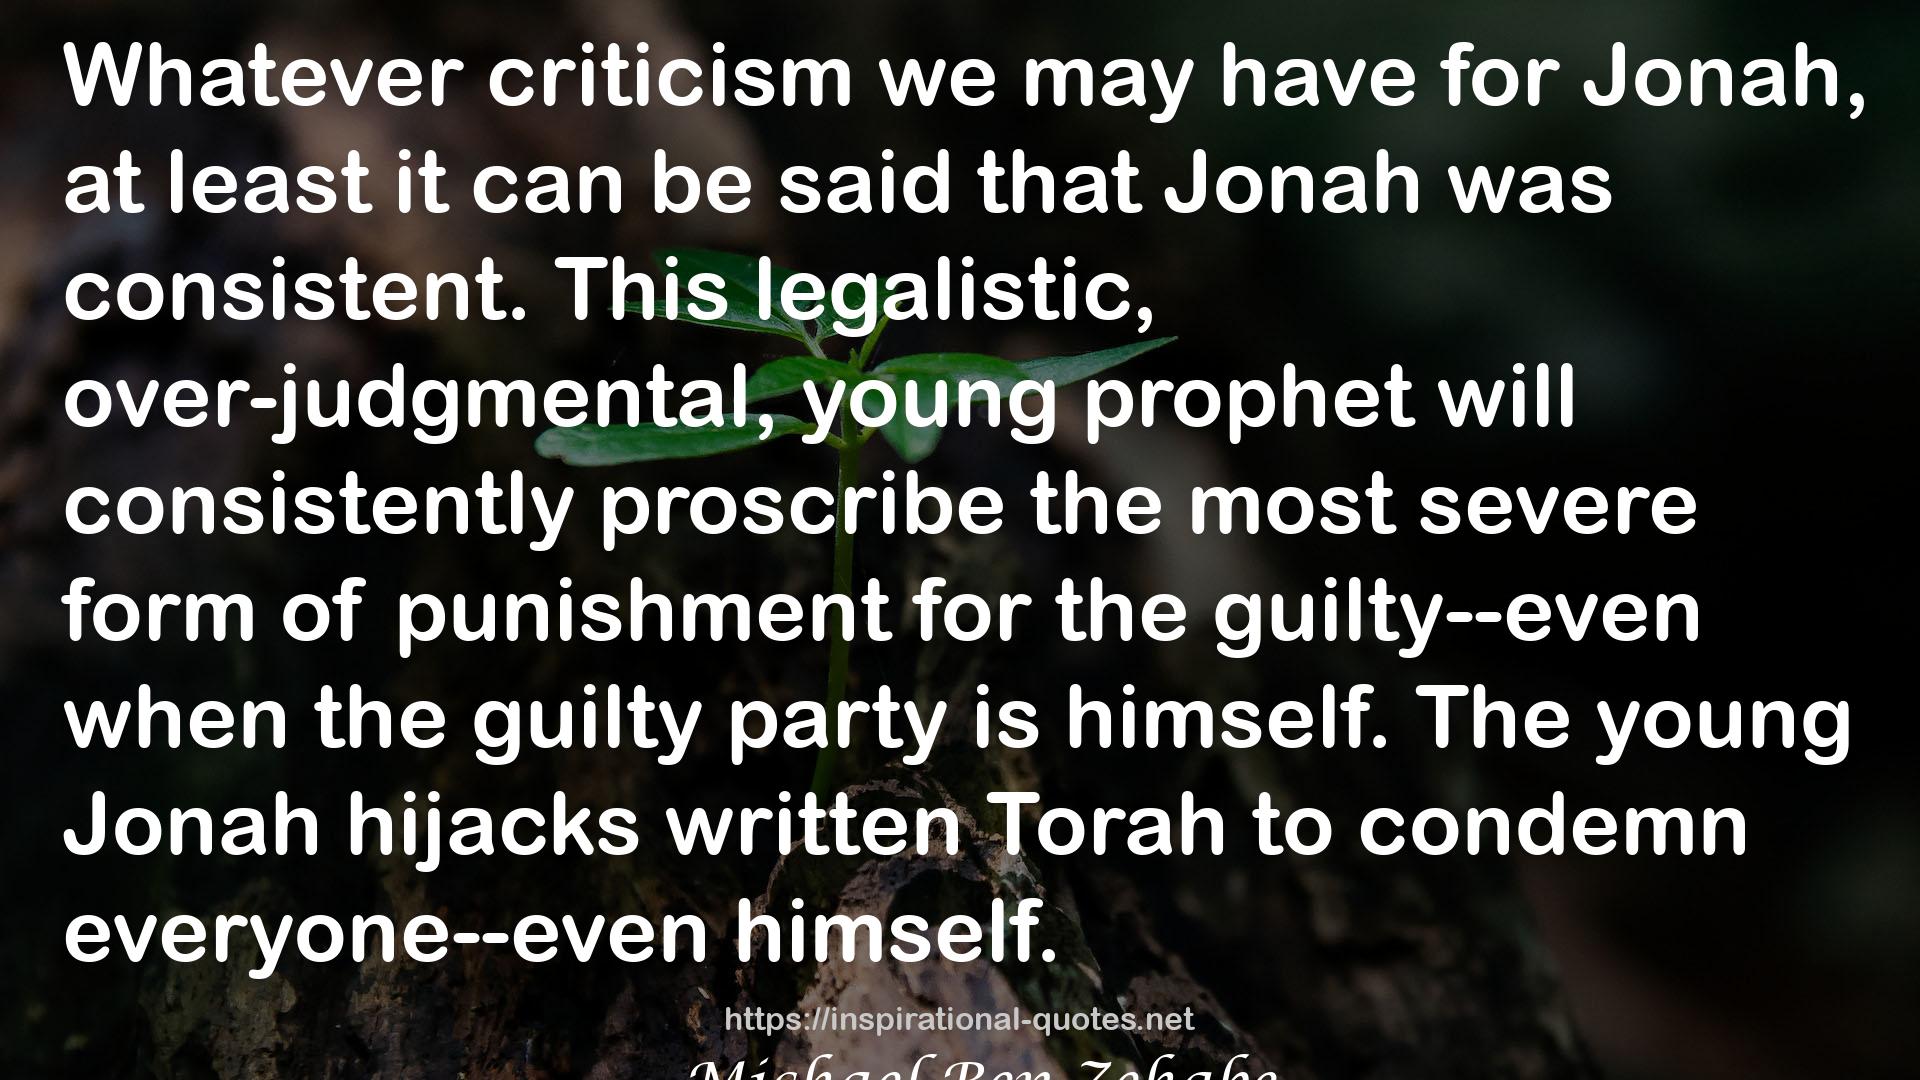 This legalistic, over-judgmental, young prophet  QUOTES